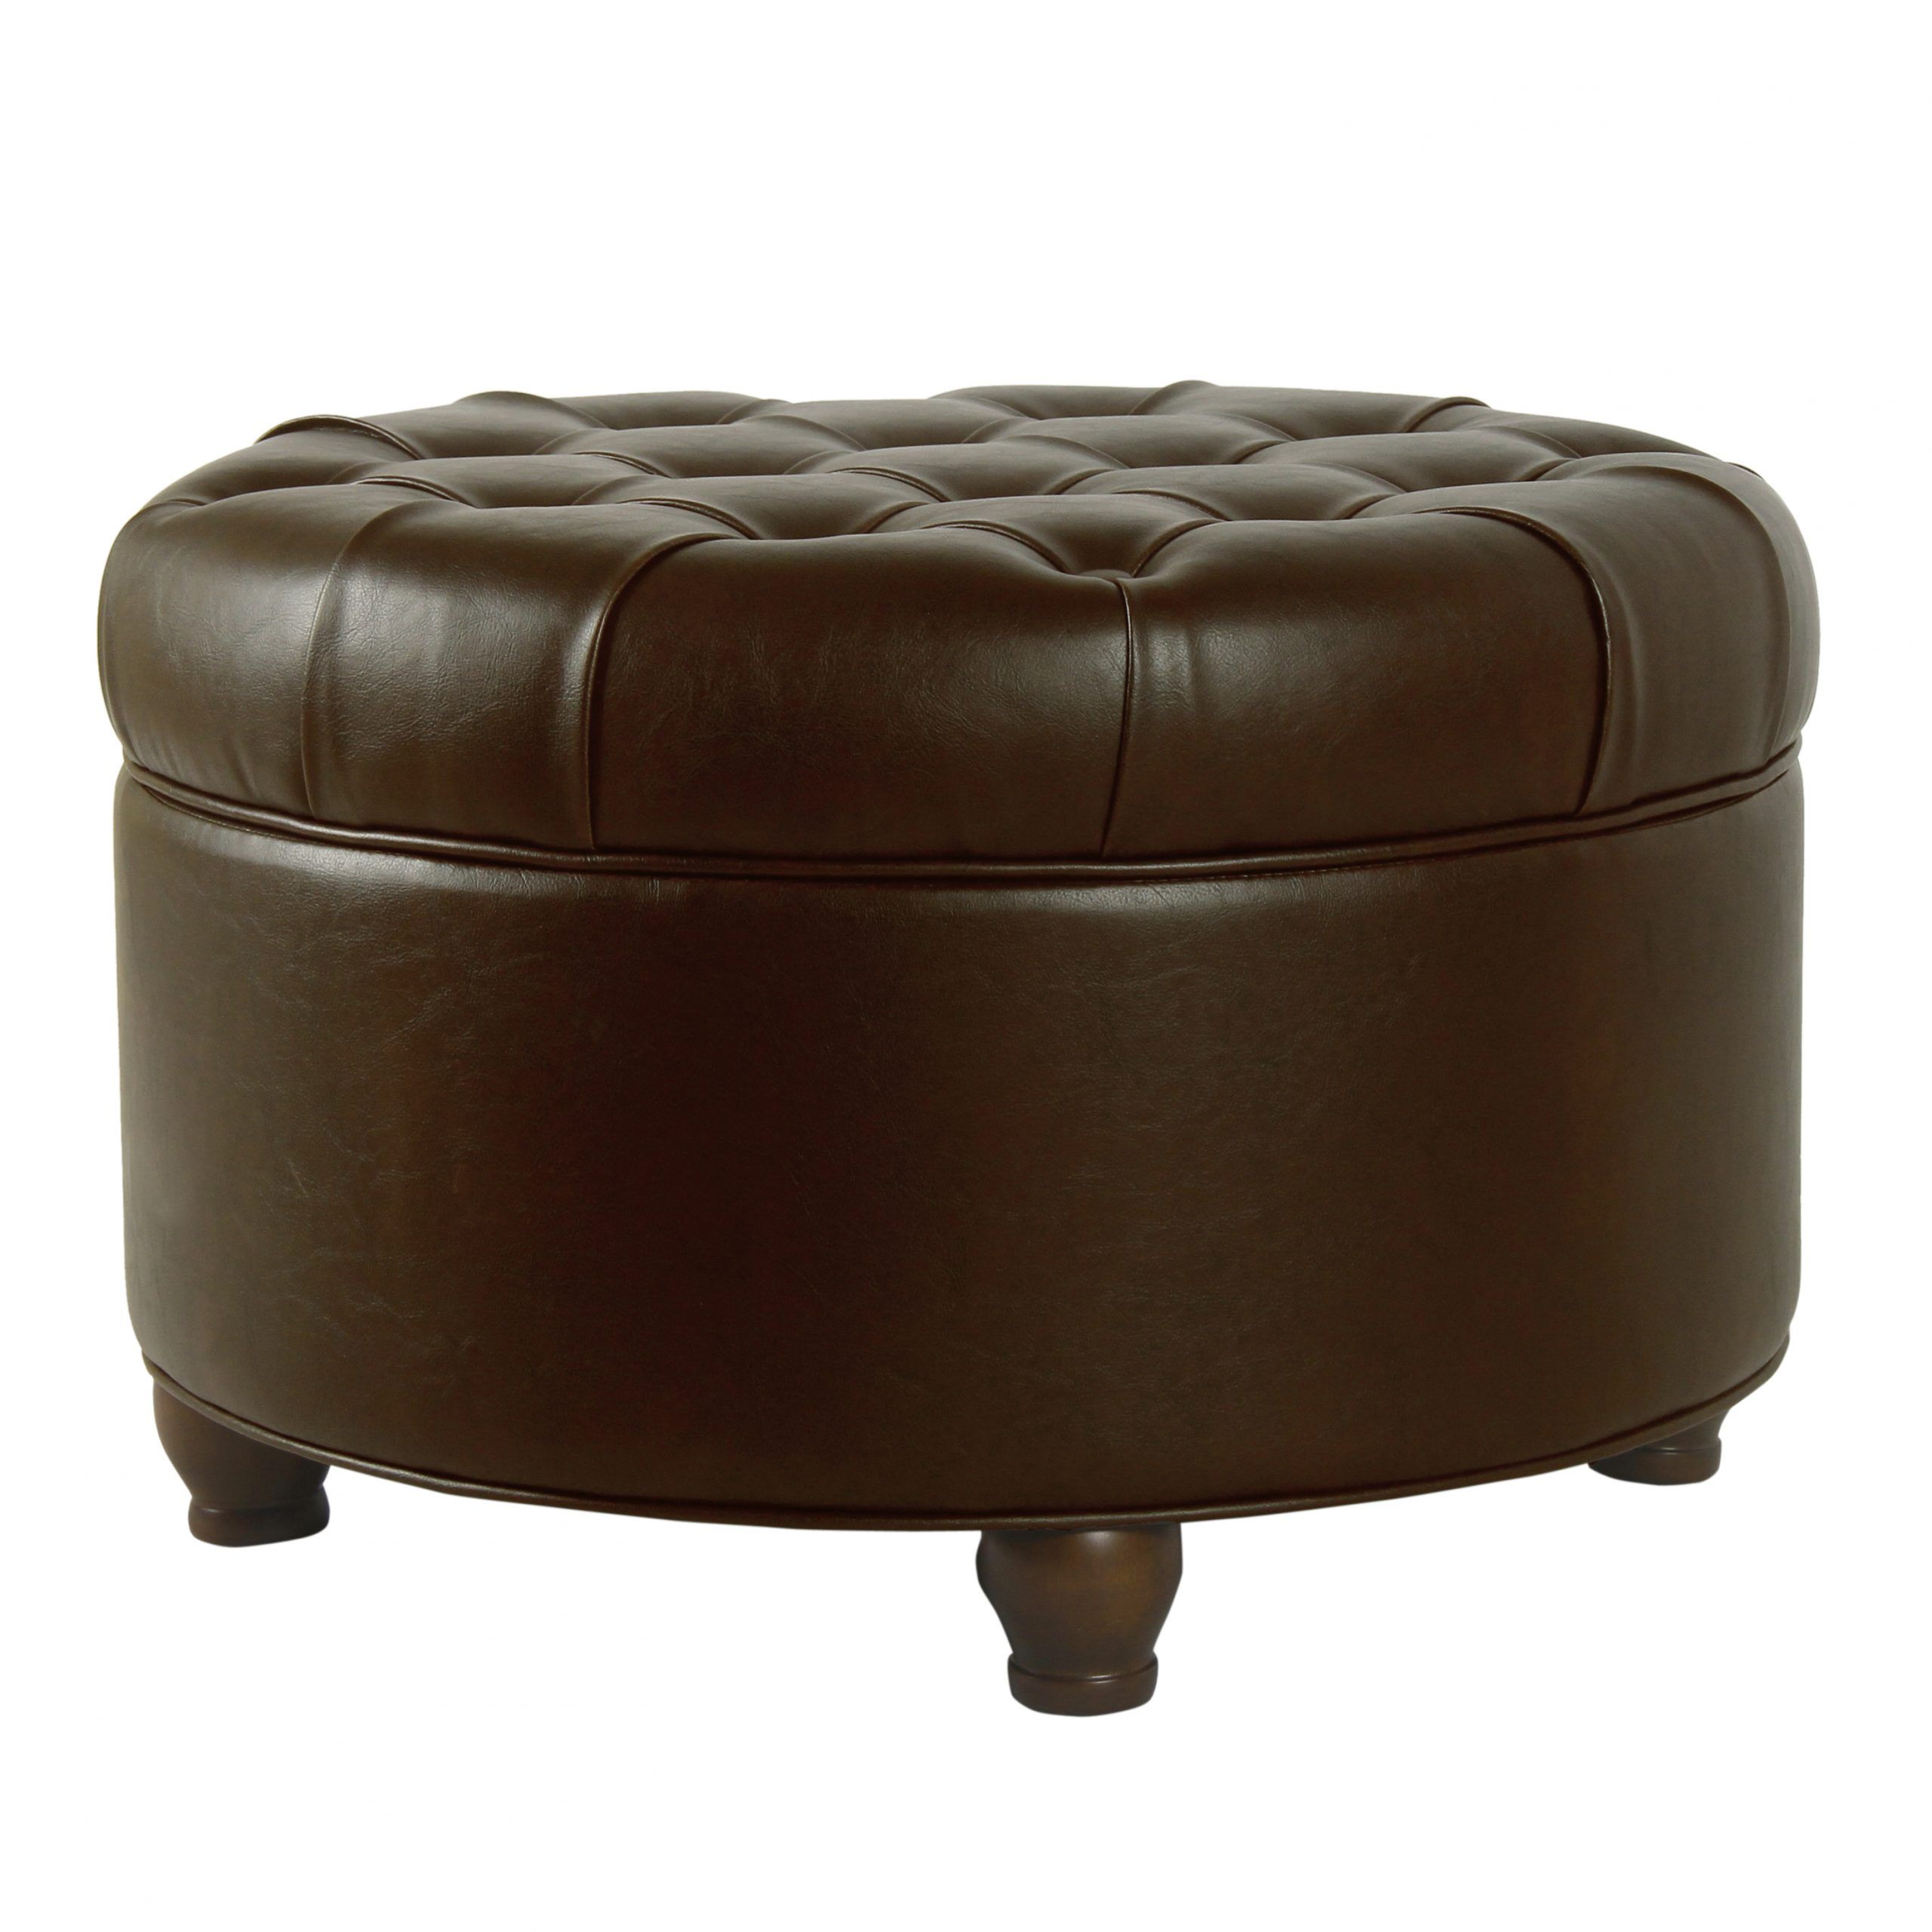 Gold And White Leather Round Ottomans With Current Homepop Large Tufted Round Storage Ottoman, Multiple Colors – Walmart (View 1 of 10)